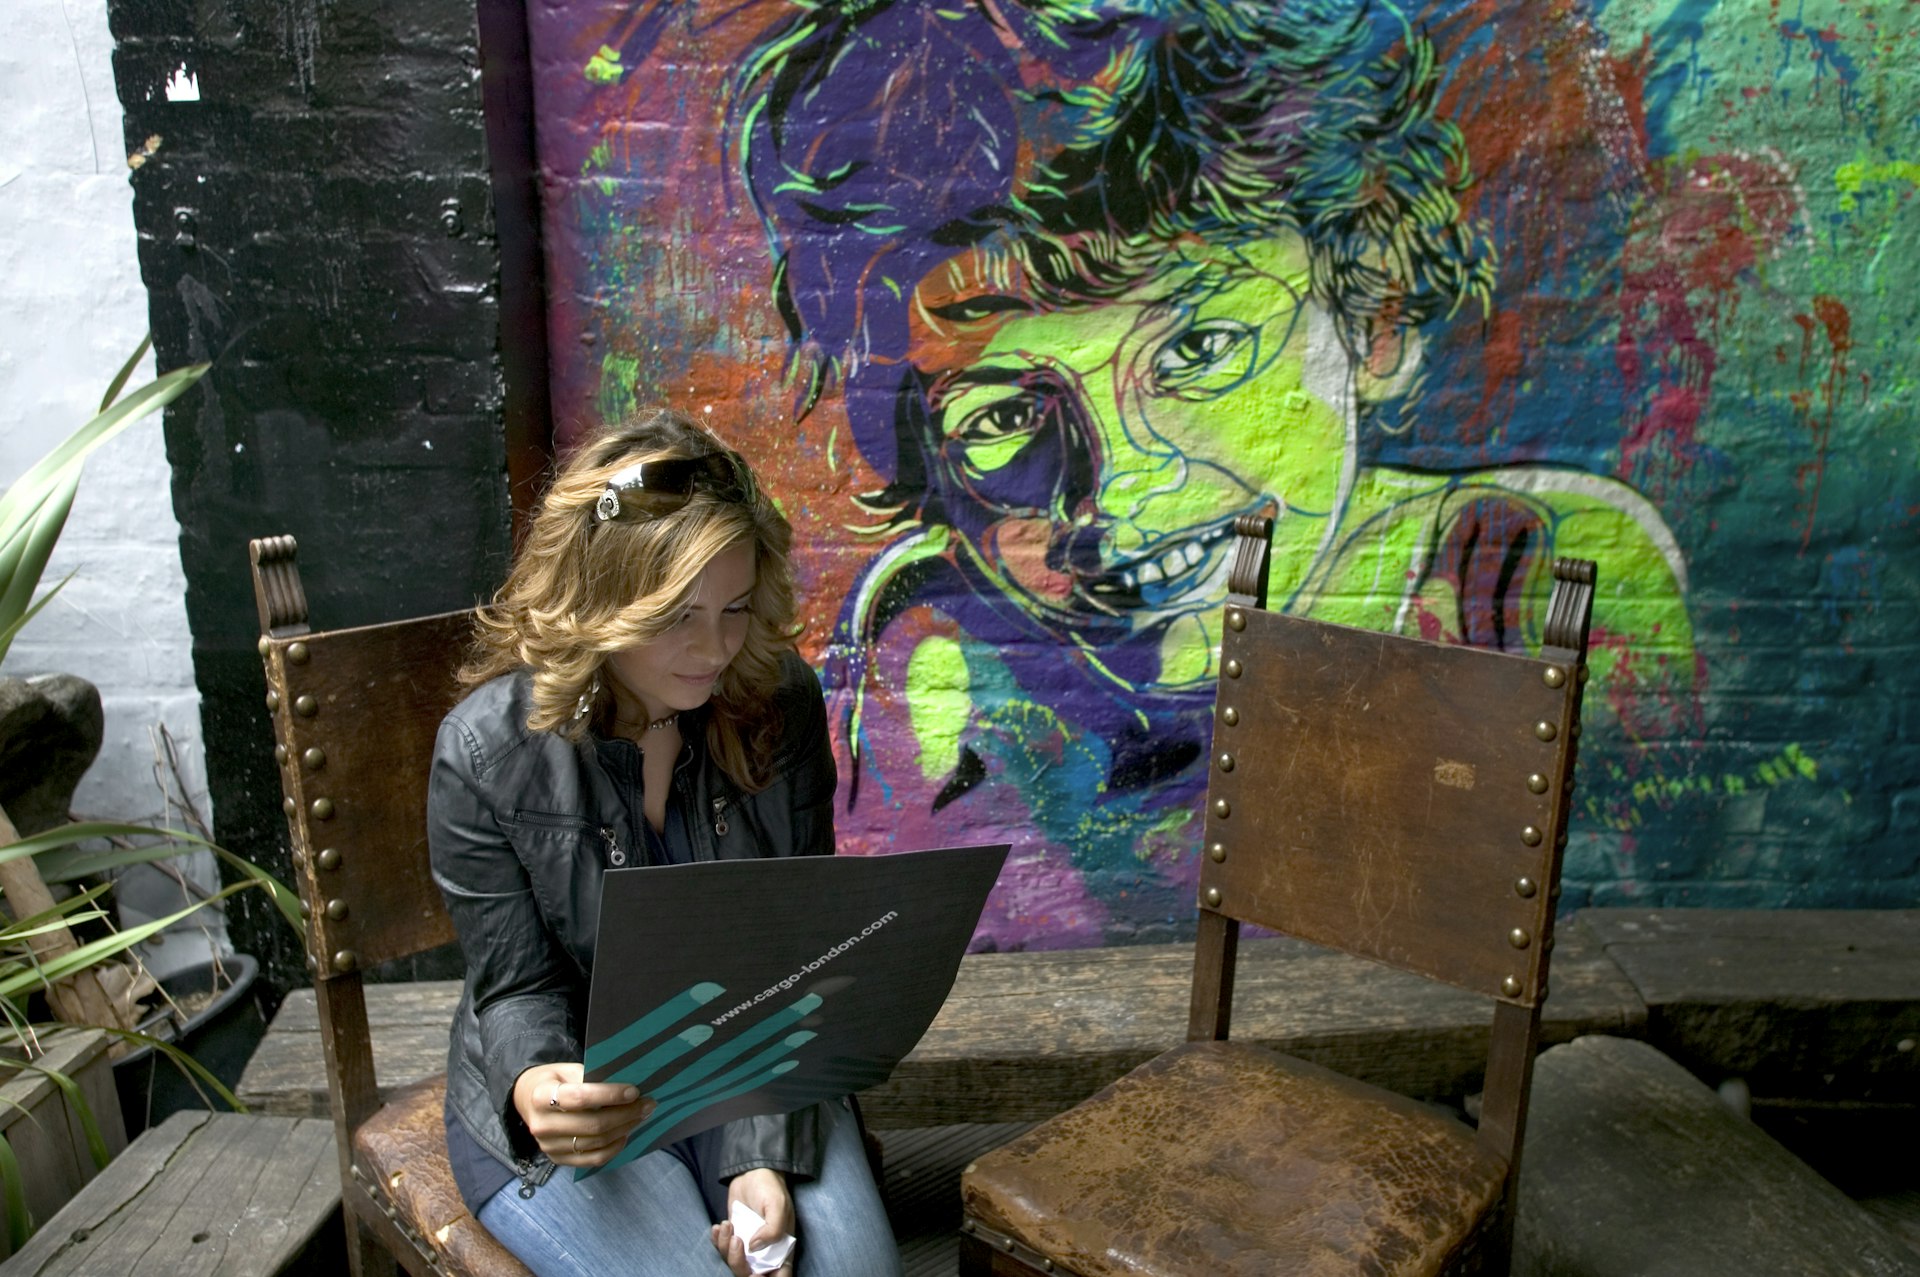 A brown hair white woman, around 40 years old, sits on an old brown chair next to an empty chair with street art behind her of a woman in green and purple taken inside Cargo Club, Shoreditch 